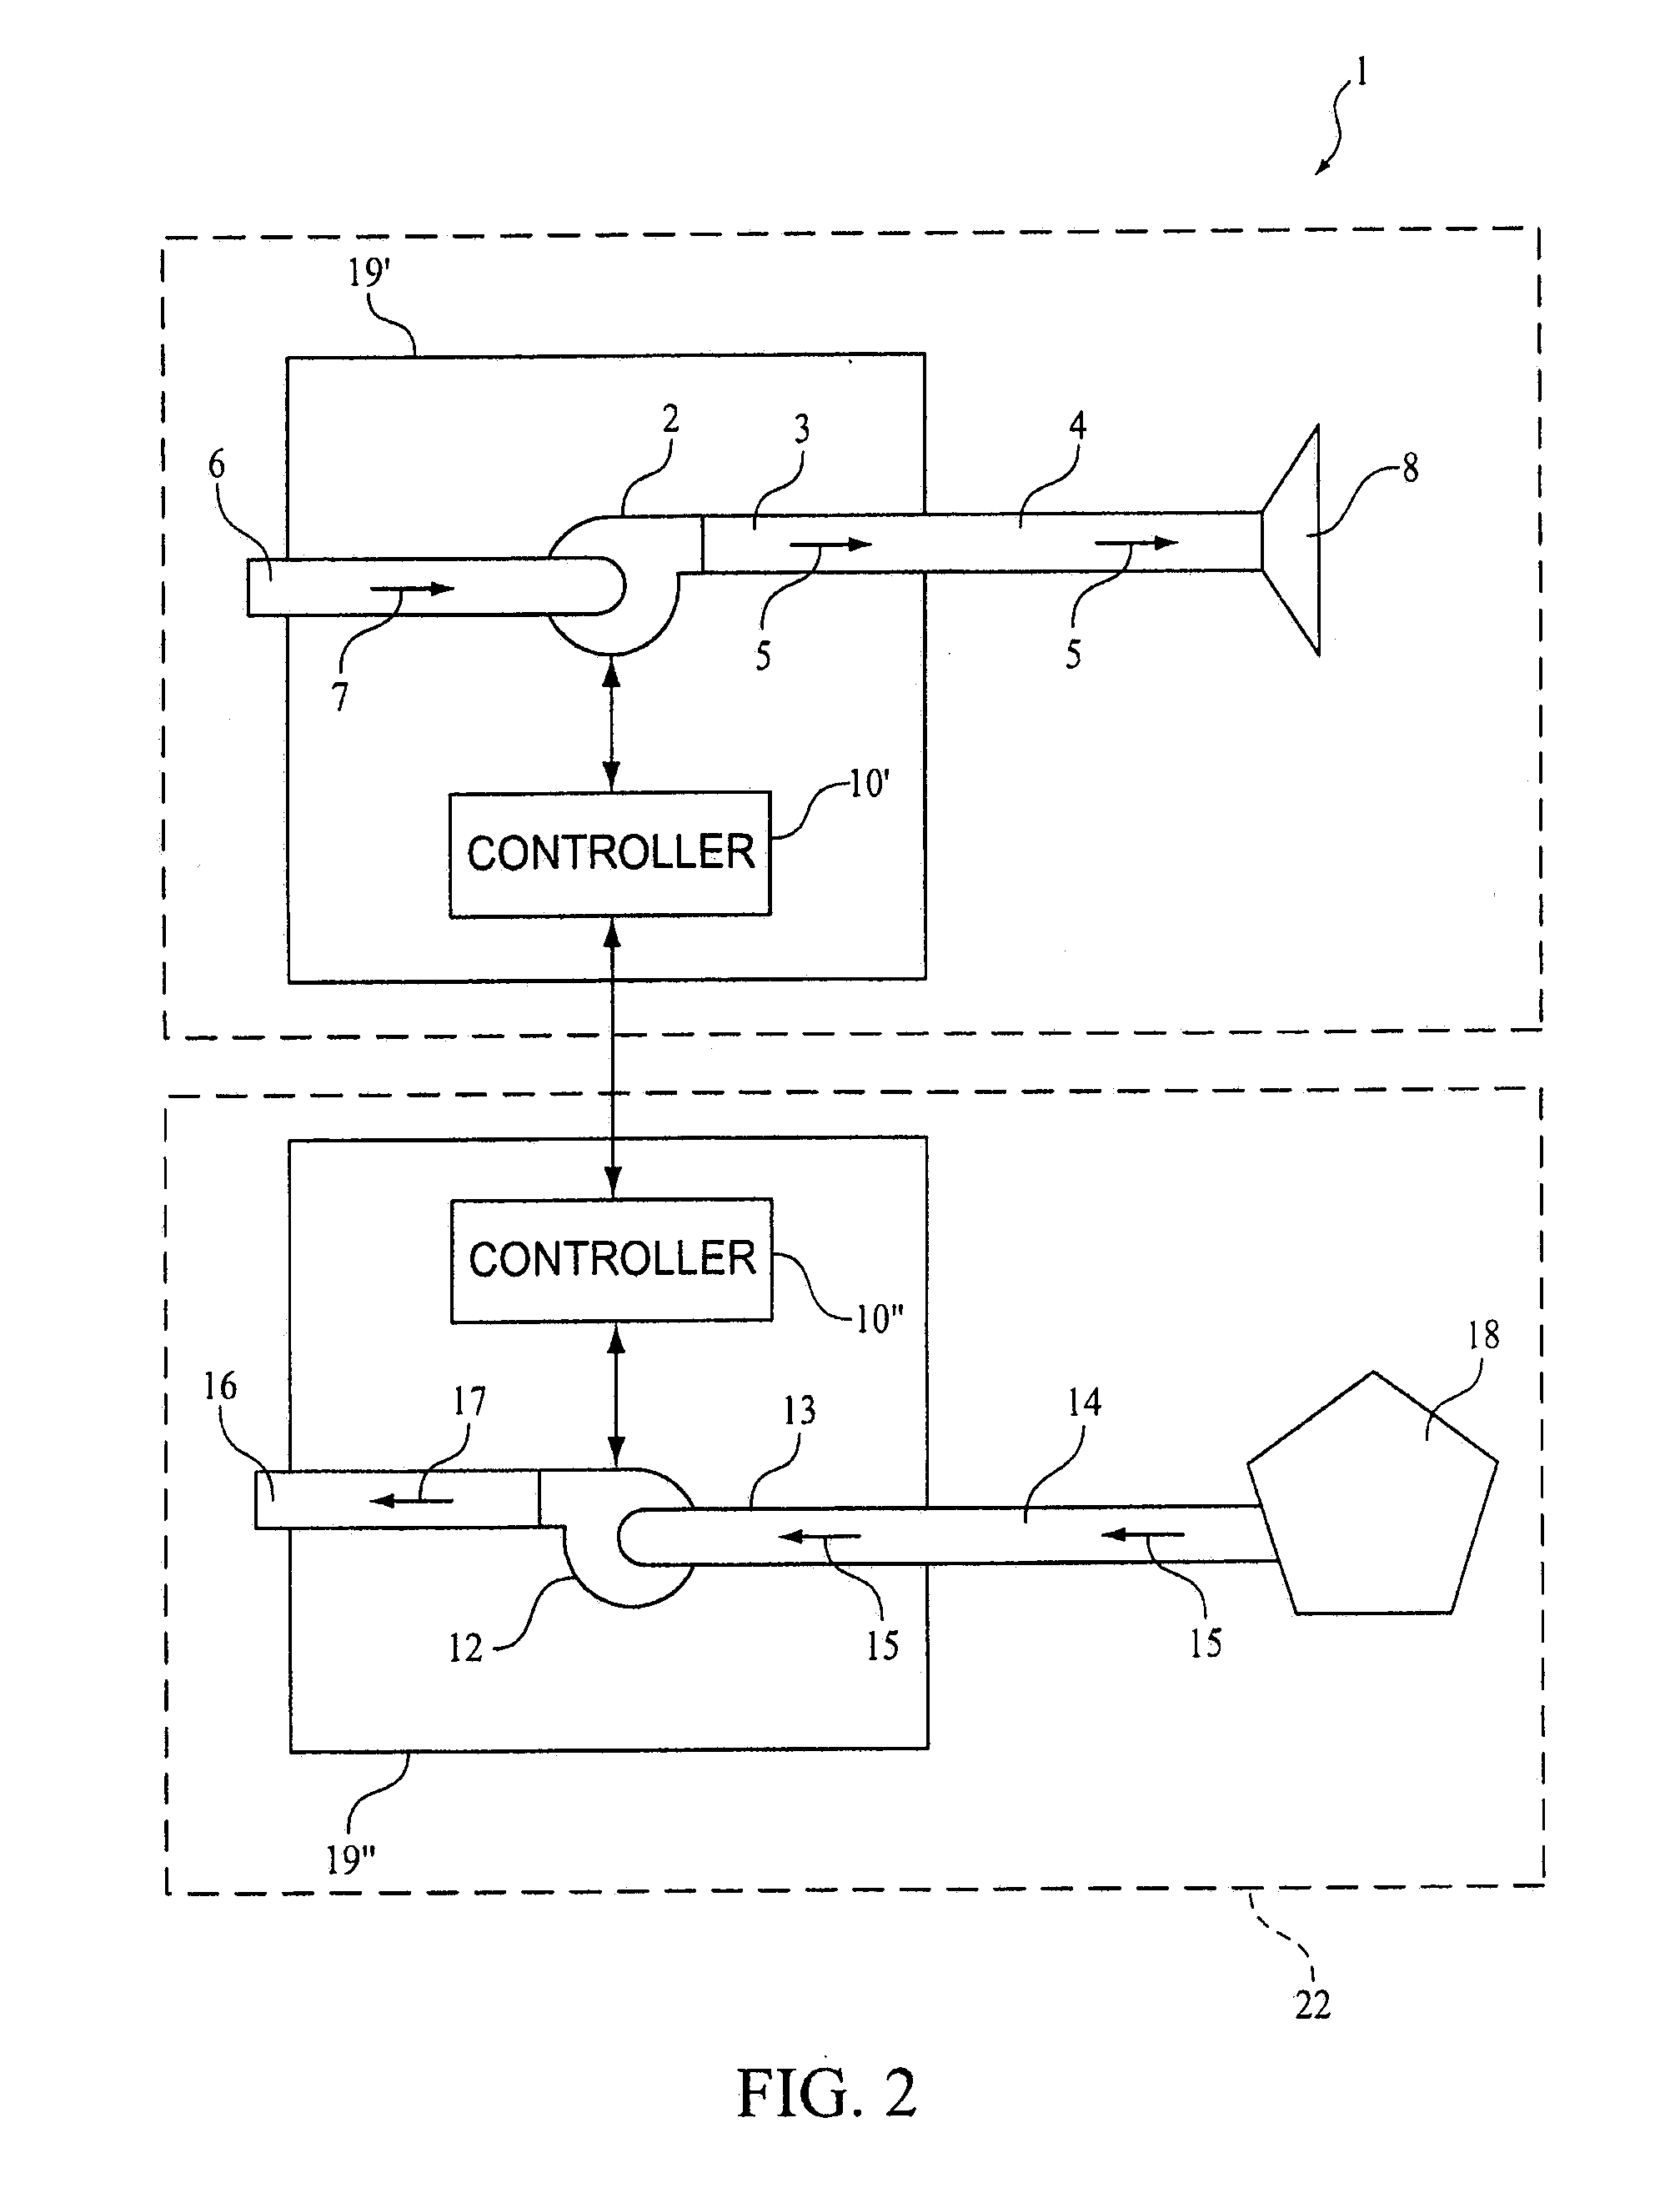 Ventilation System Employing Sychronized Delivery of Positive and Negative Pressure Ventilation